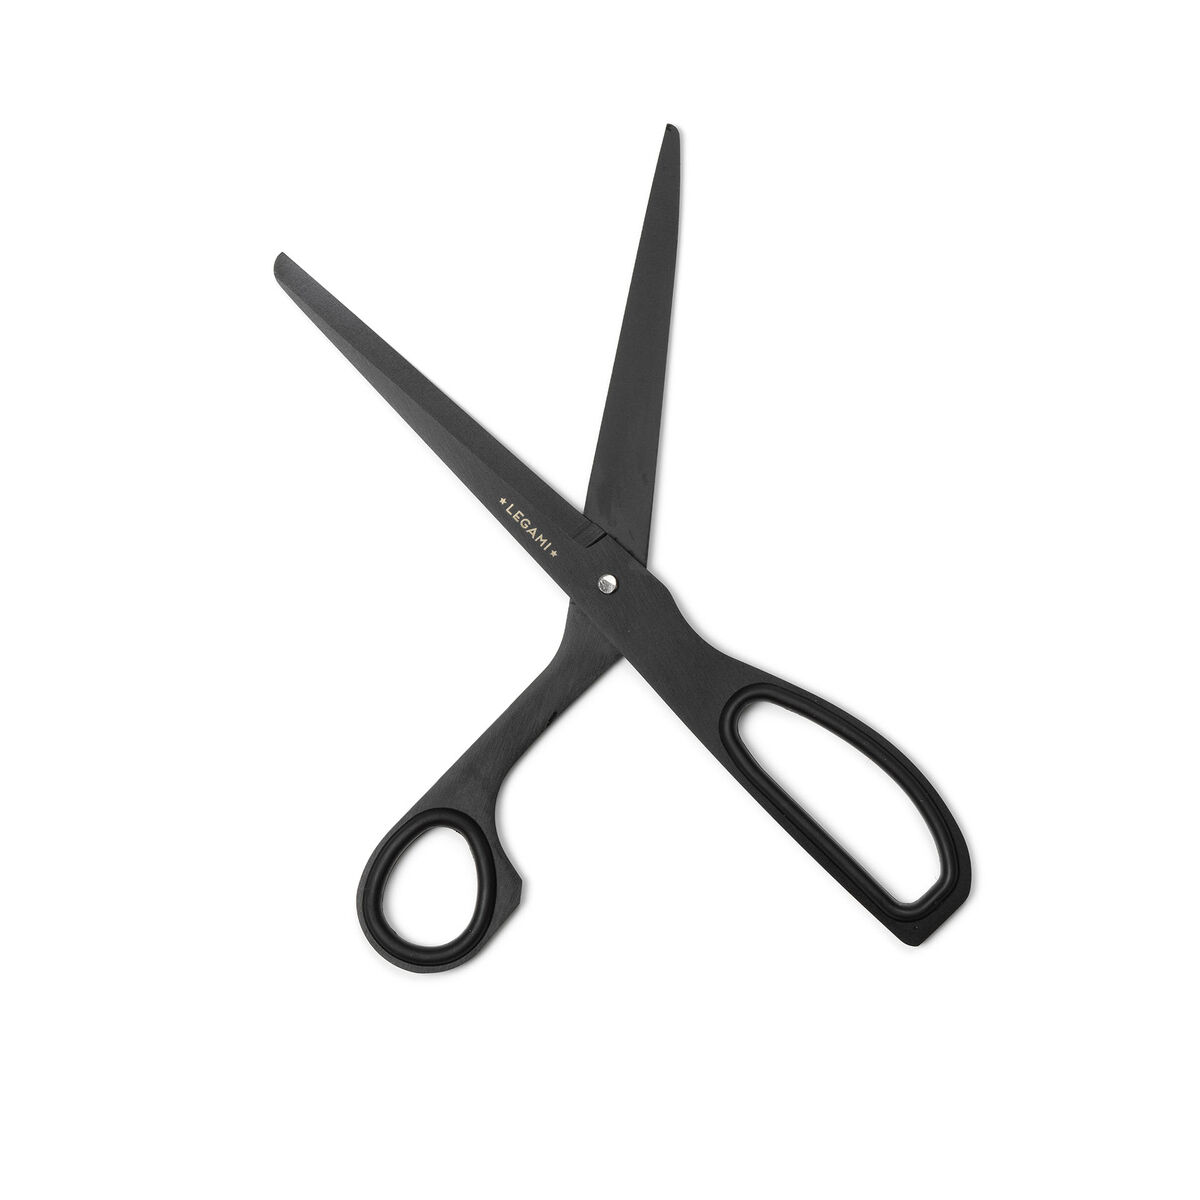 Cutting Line - Stainless Steel Scissors, , zoo